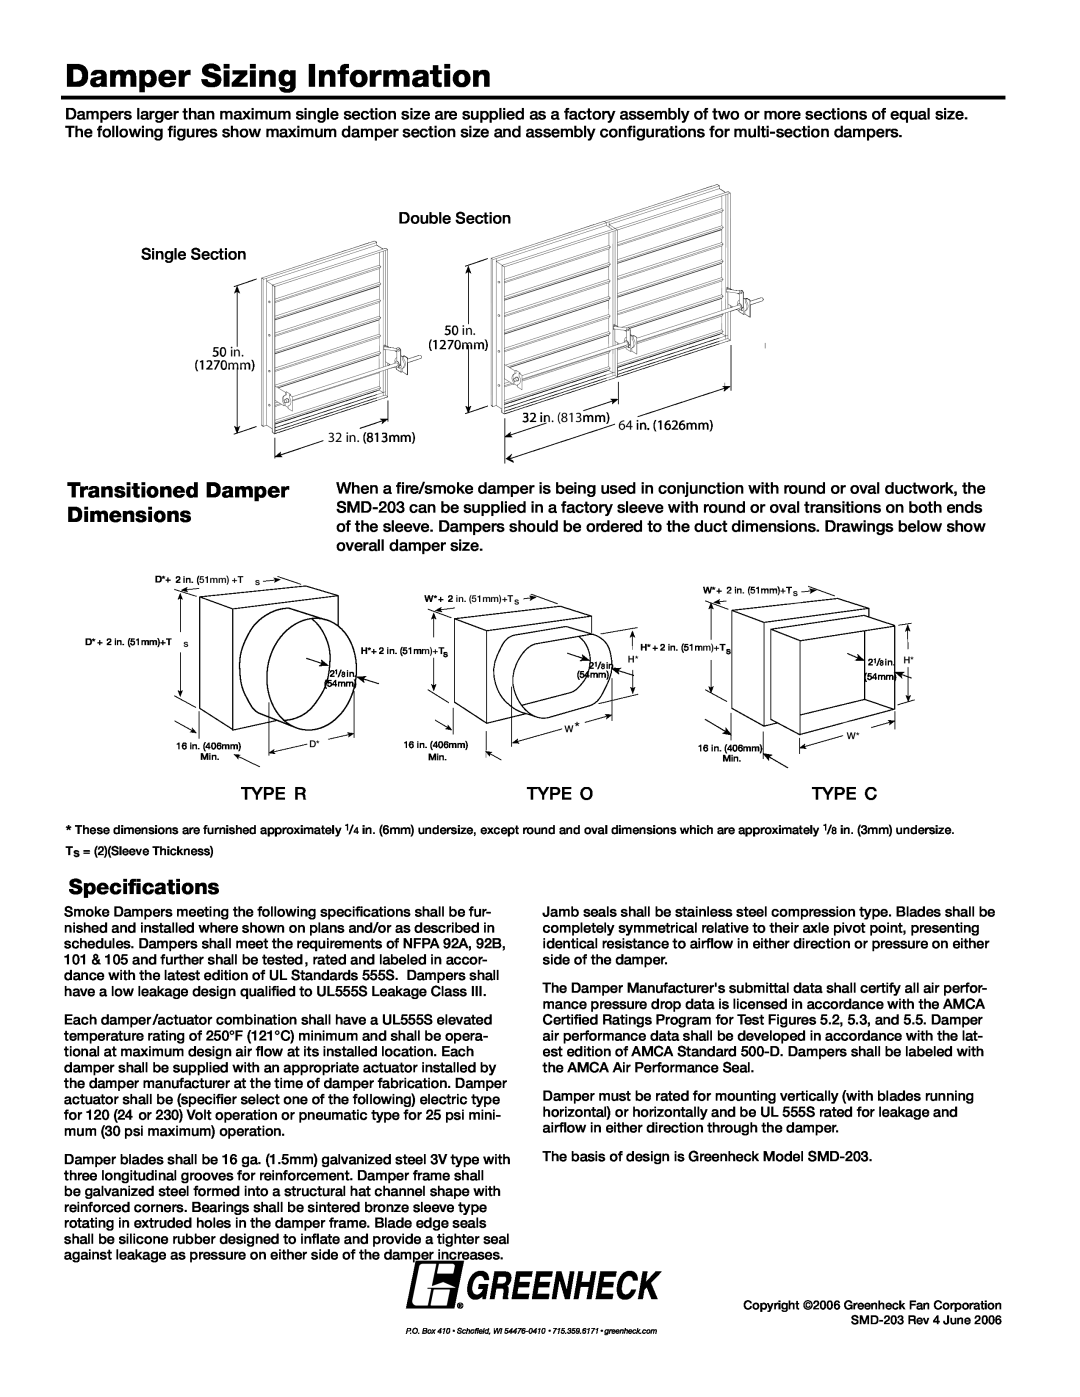 Greenheck Fan SMD-203 dimensions Damper Sizing Information, Transitioned Damper Dimensions, Specifications 